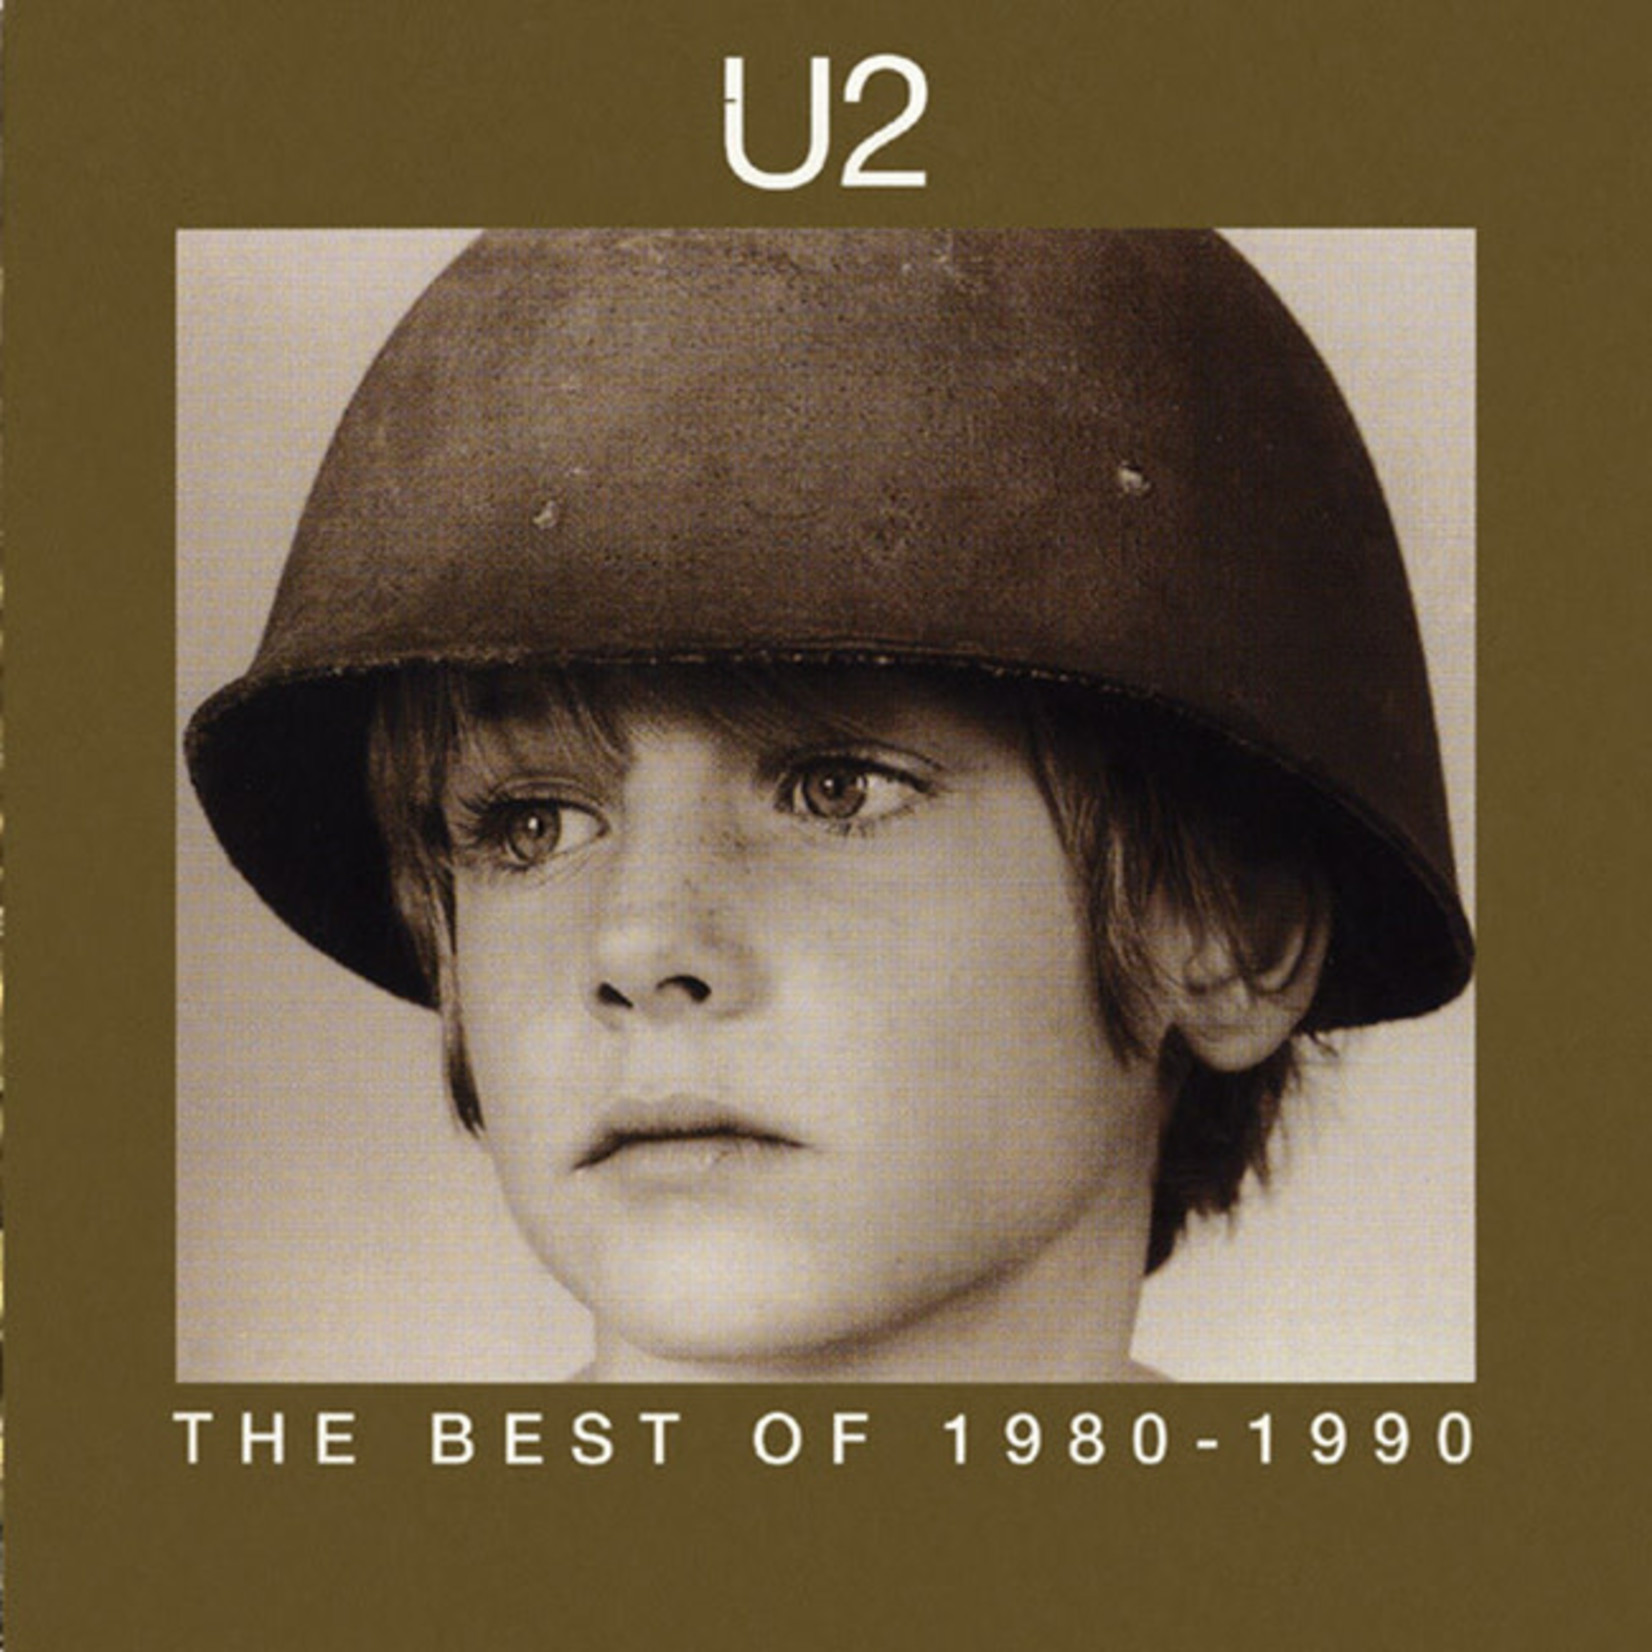 [New] U2 - The Best of 1980-1990 (2LP)